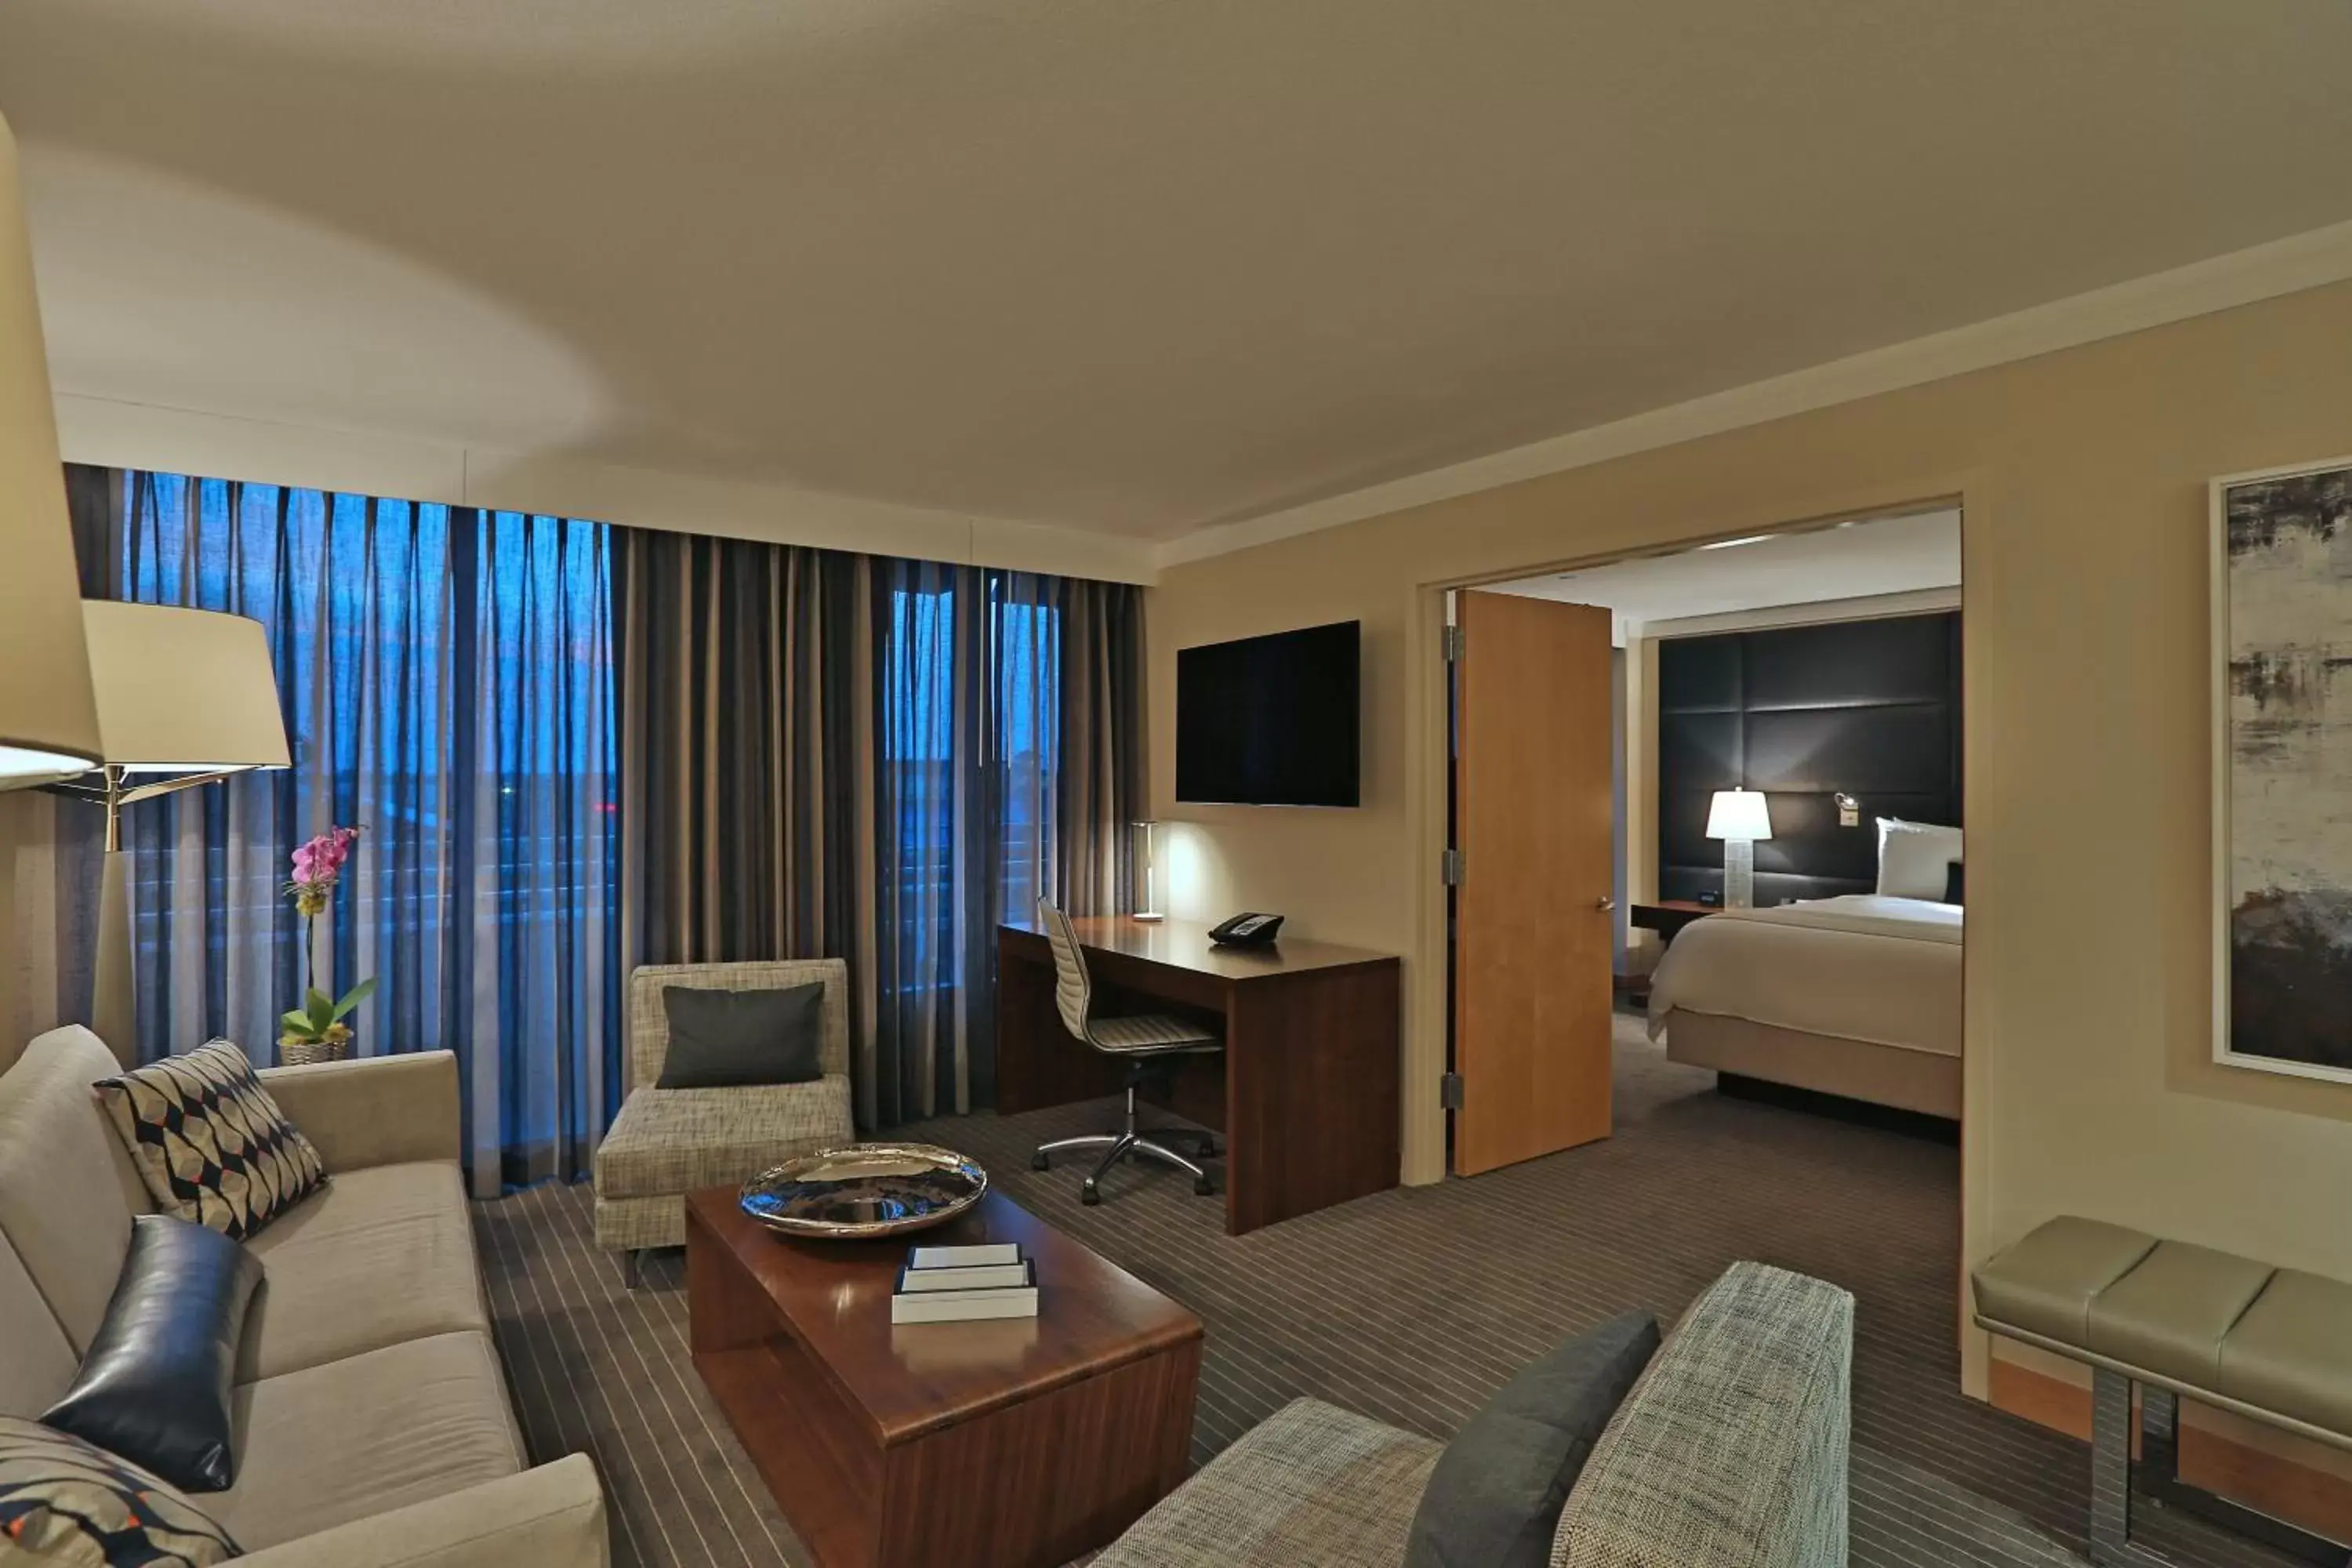 Bed, Room Photo in InterContinental at Doral Miami, an IHG Hotel